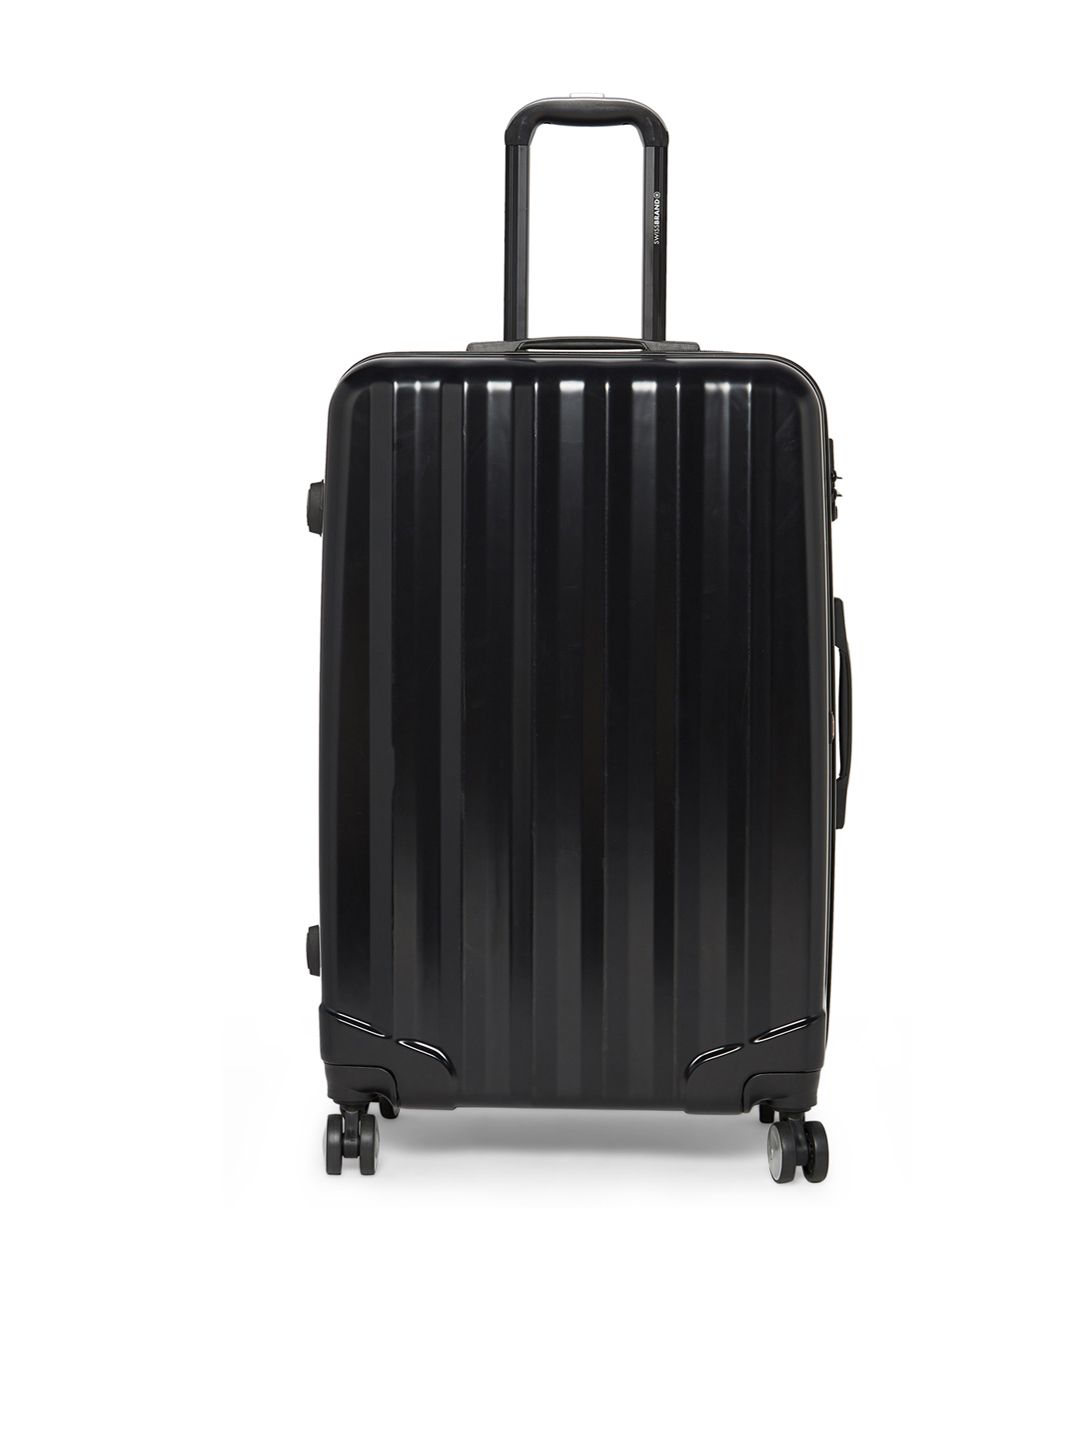 SWISS BRAND Black Solid Soft-Sided Medium Trolley Suitcase Price in India